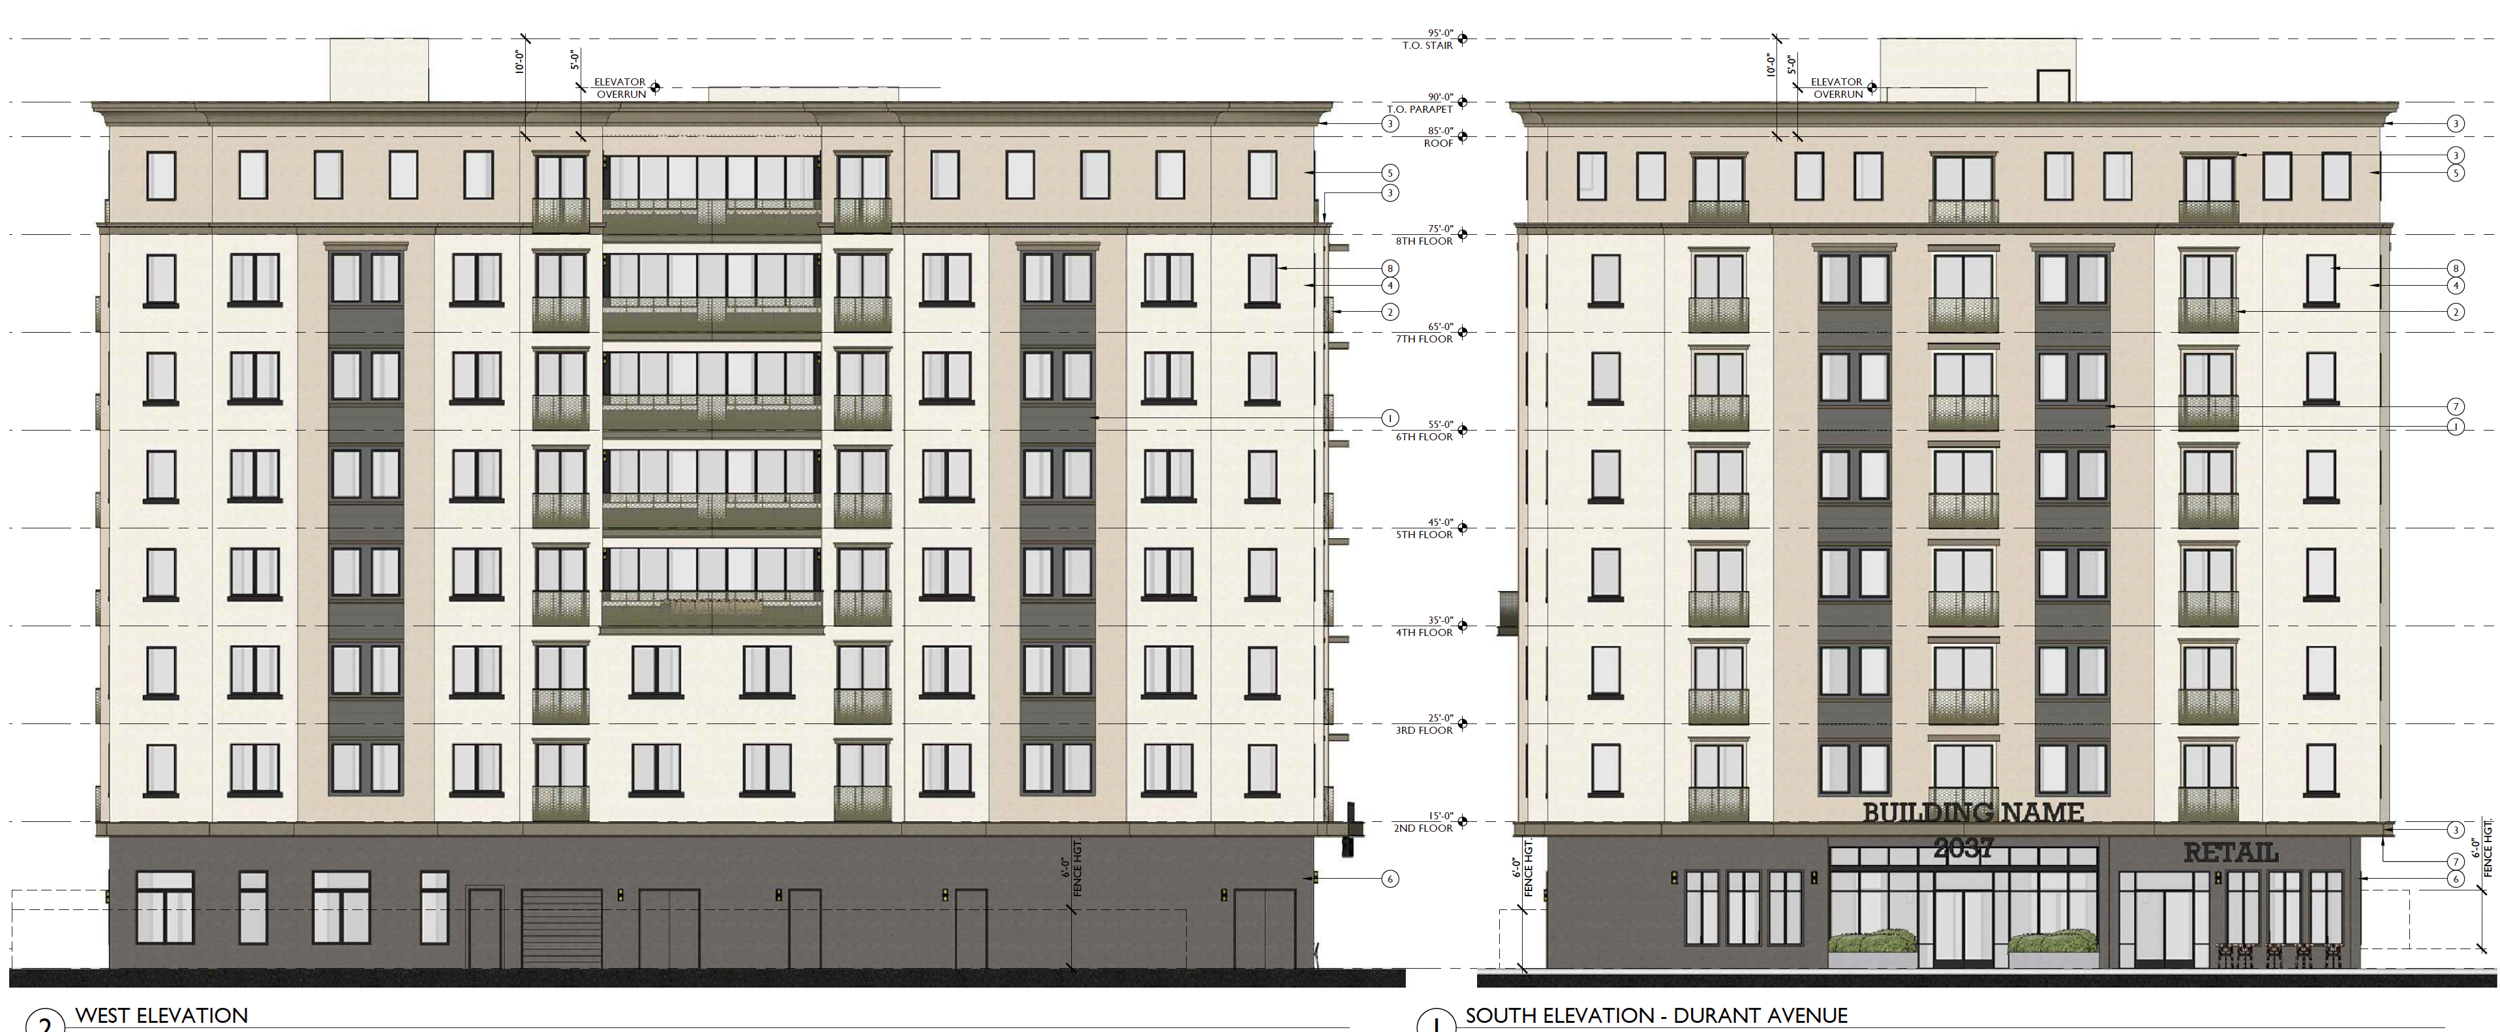 2037 Durant Avenue west and south facade elevation, rendering by Studio KDA